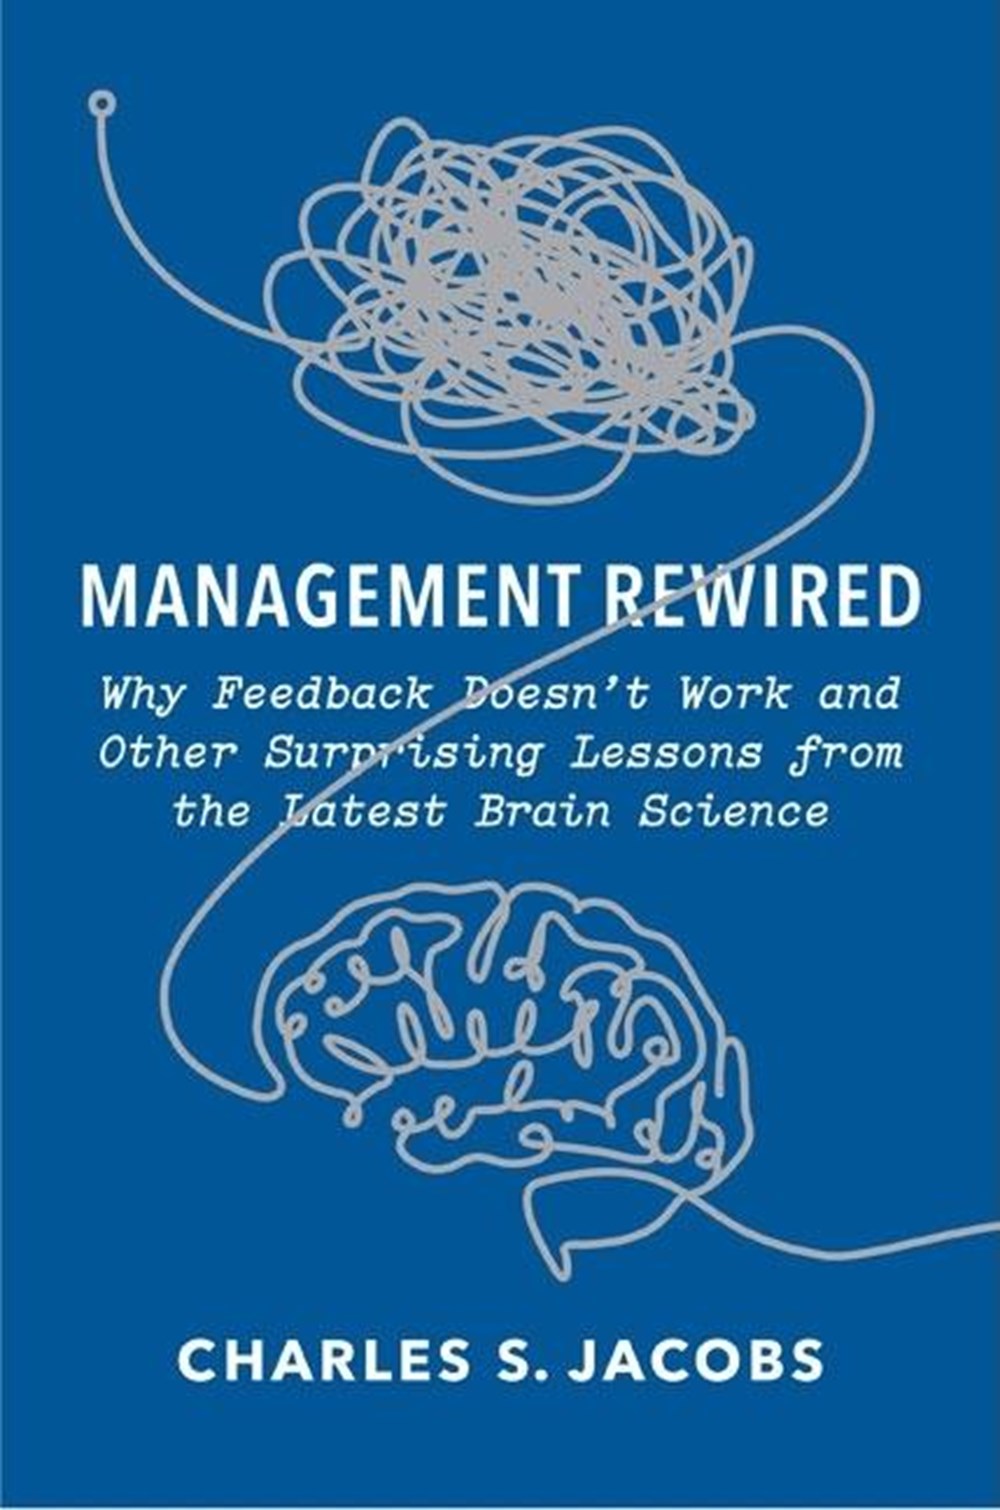 Management Rewired Why Feedback Doesn't Work and Other Surprising Lessons from the Latest Brain Scie